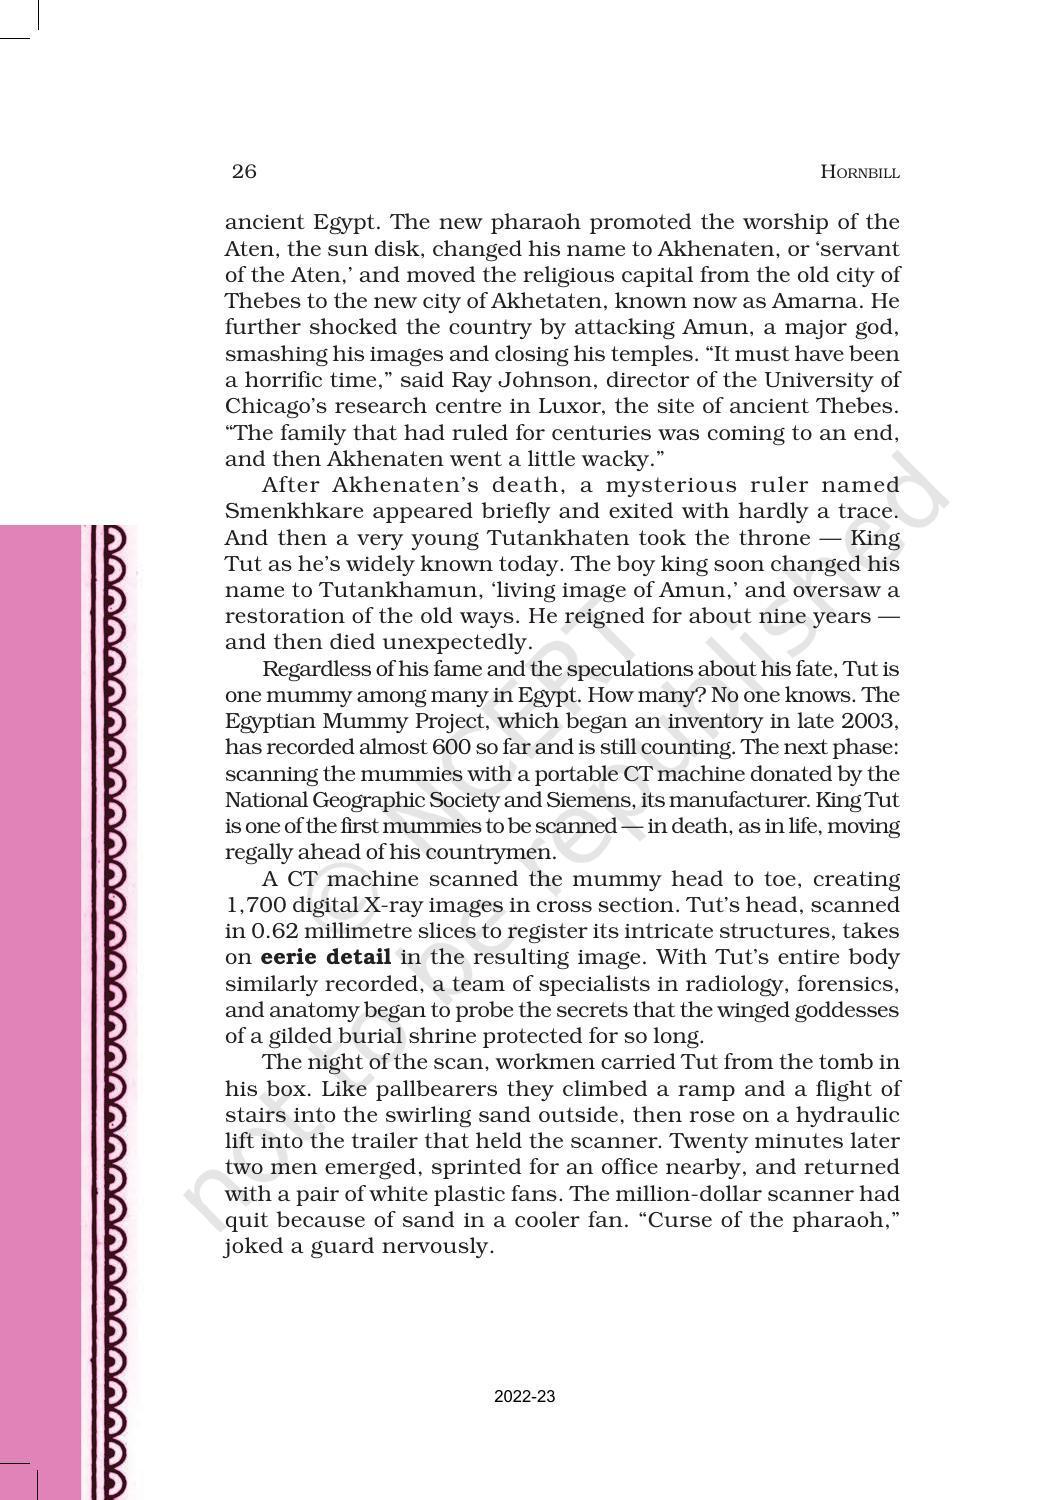 NCERT Book for Class 11 English Hornbill Chapter 3 Discovering Tut: The Saga Continues - Page 5